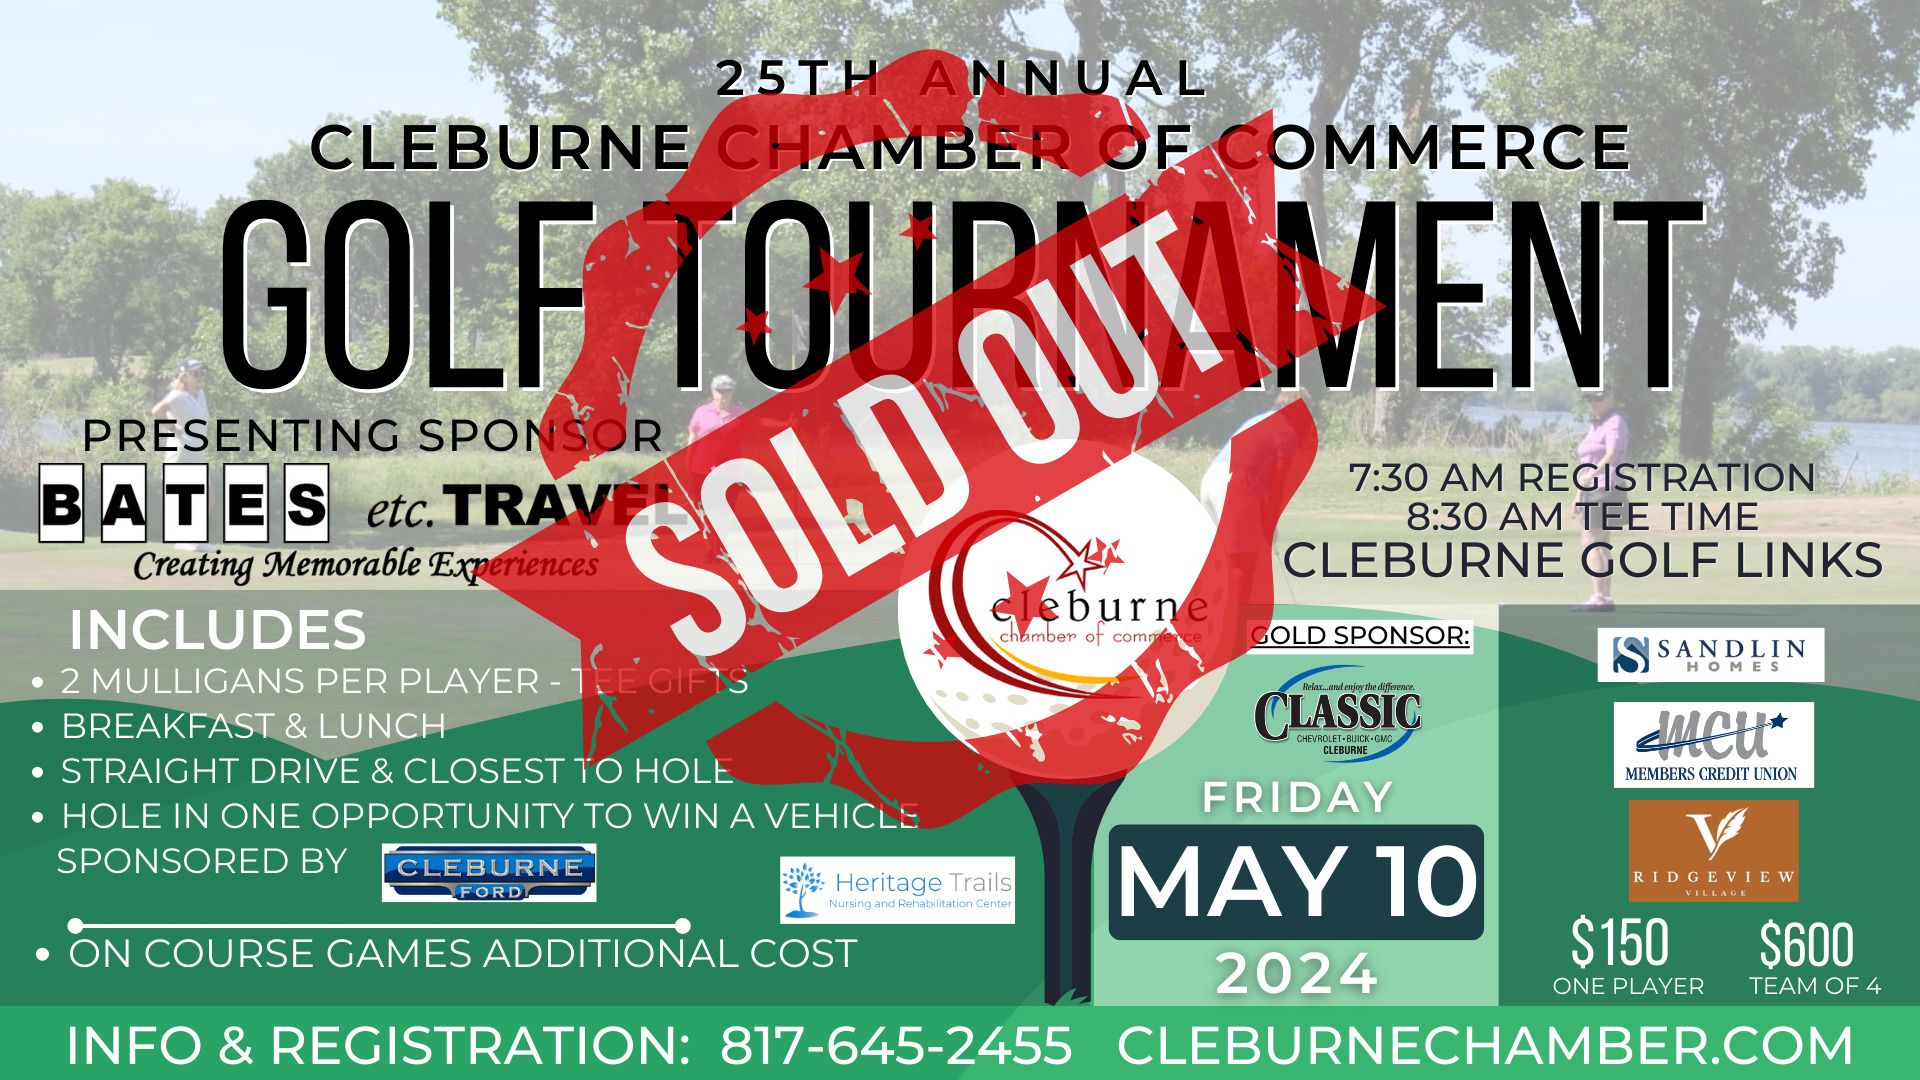 SOLD OUT Golf TOURNAMENT Flyer (1920 × 1080 px) (7)